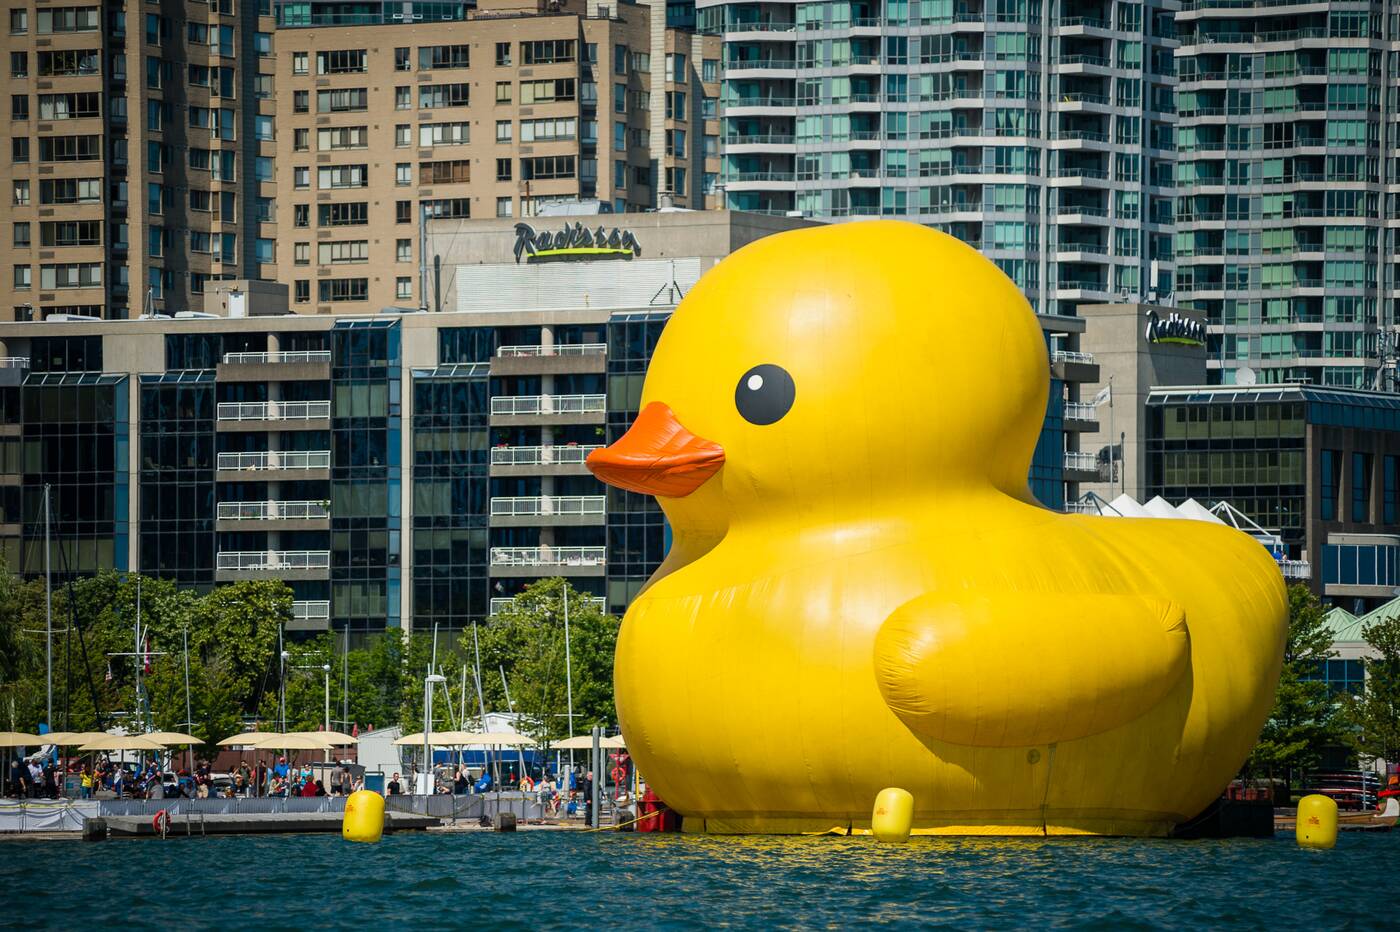 Giant rubber duck returns to Toronto this weekend